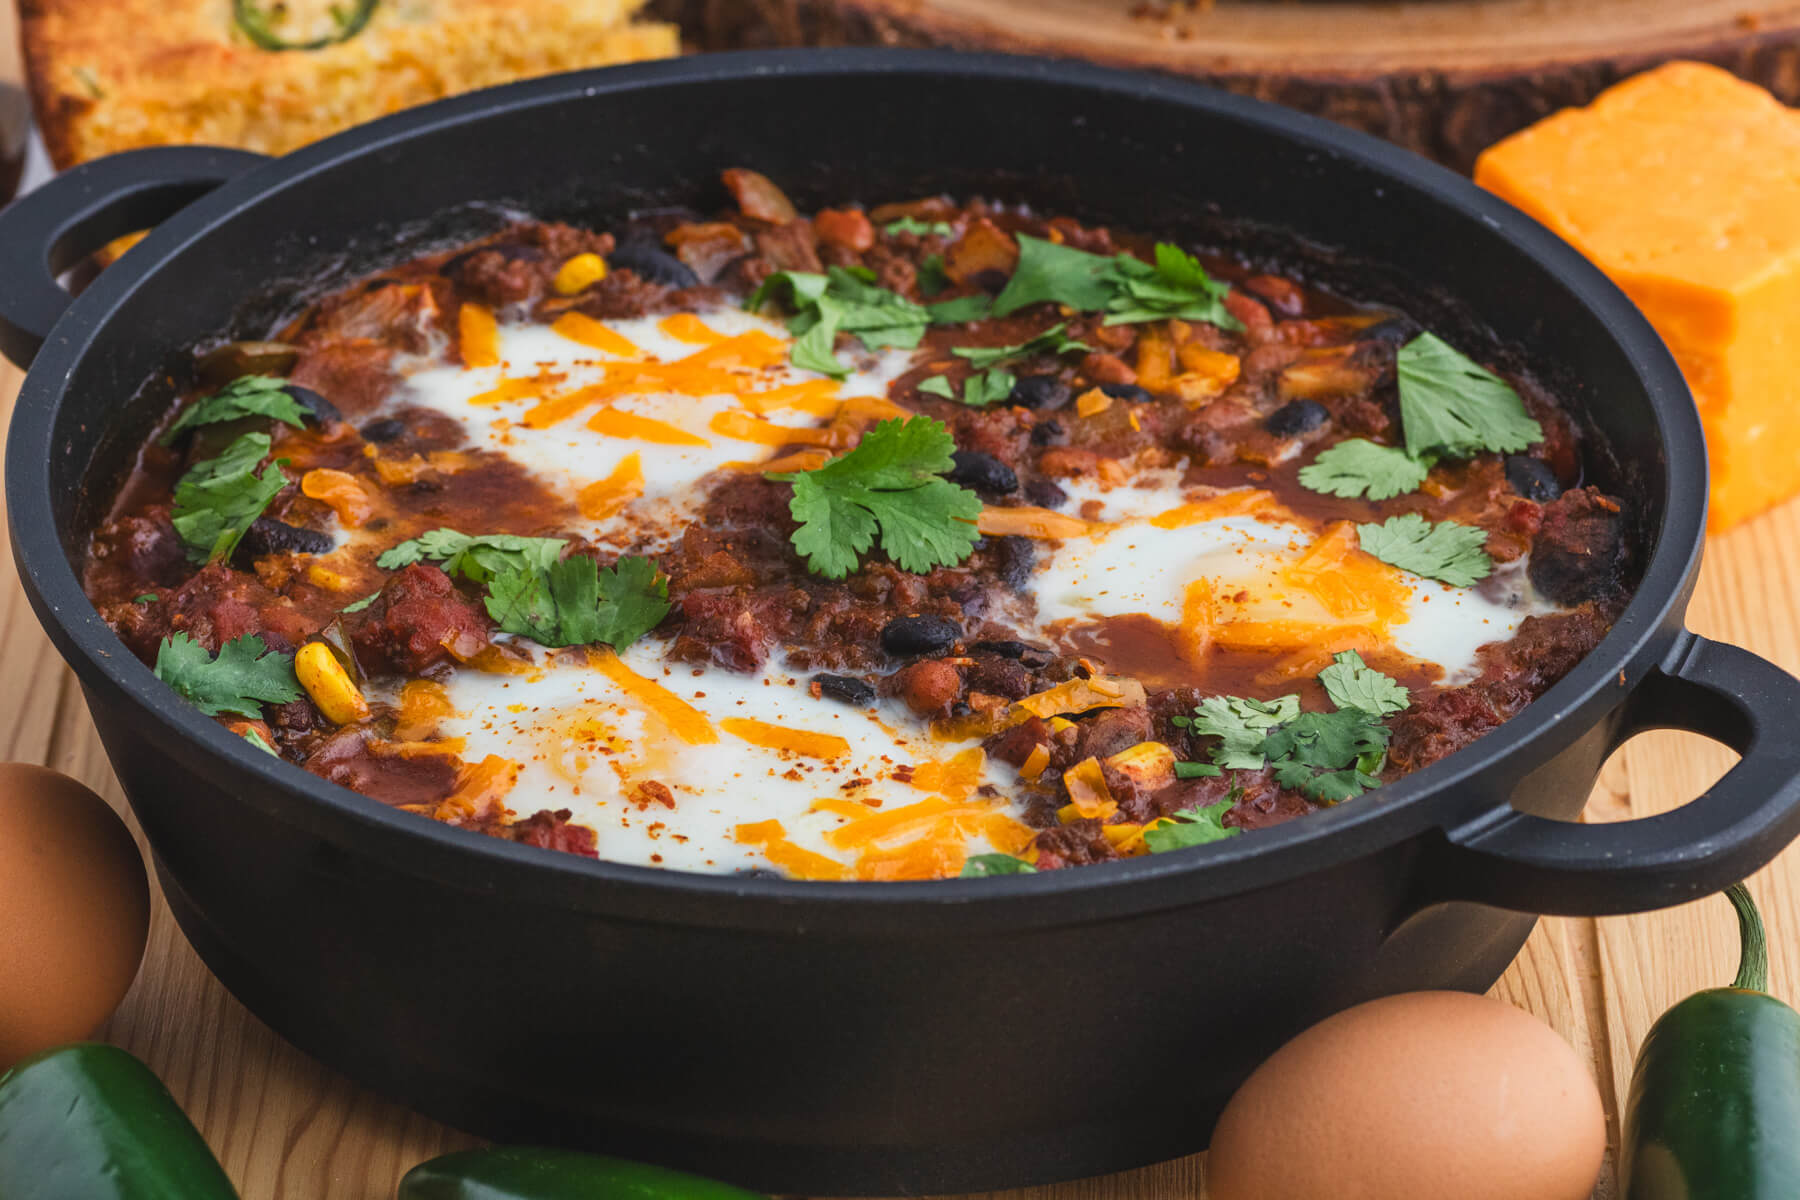 A cast iron skillet full of baked chili and eggs surrounded by cornbread, cheddar cheese, eggs, and jalapenos.